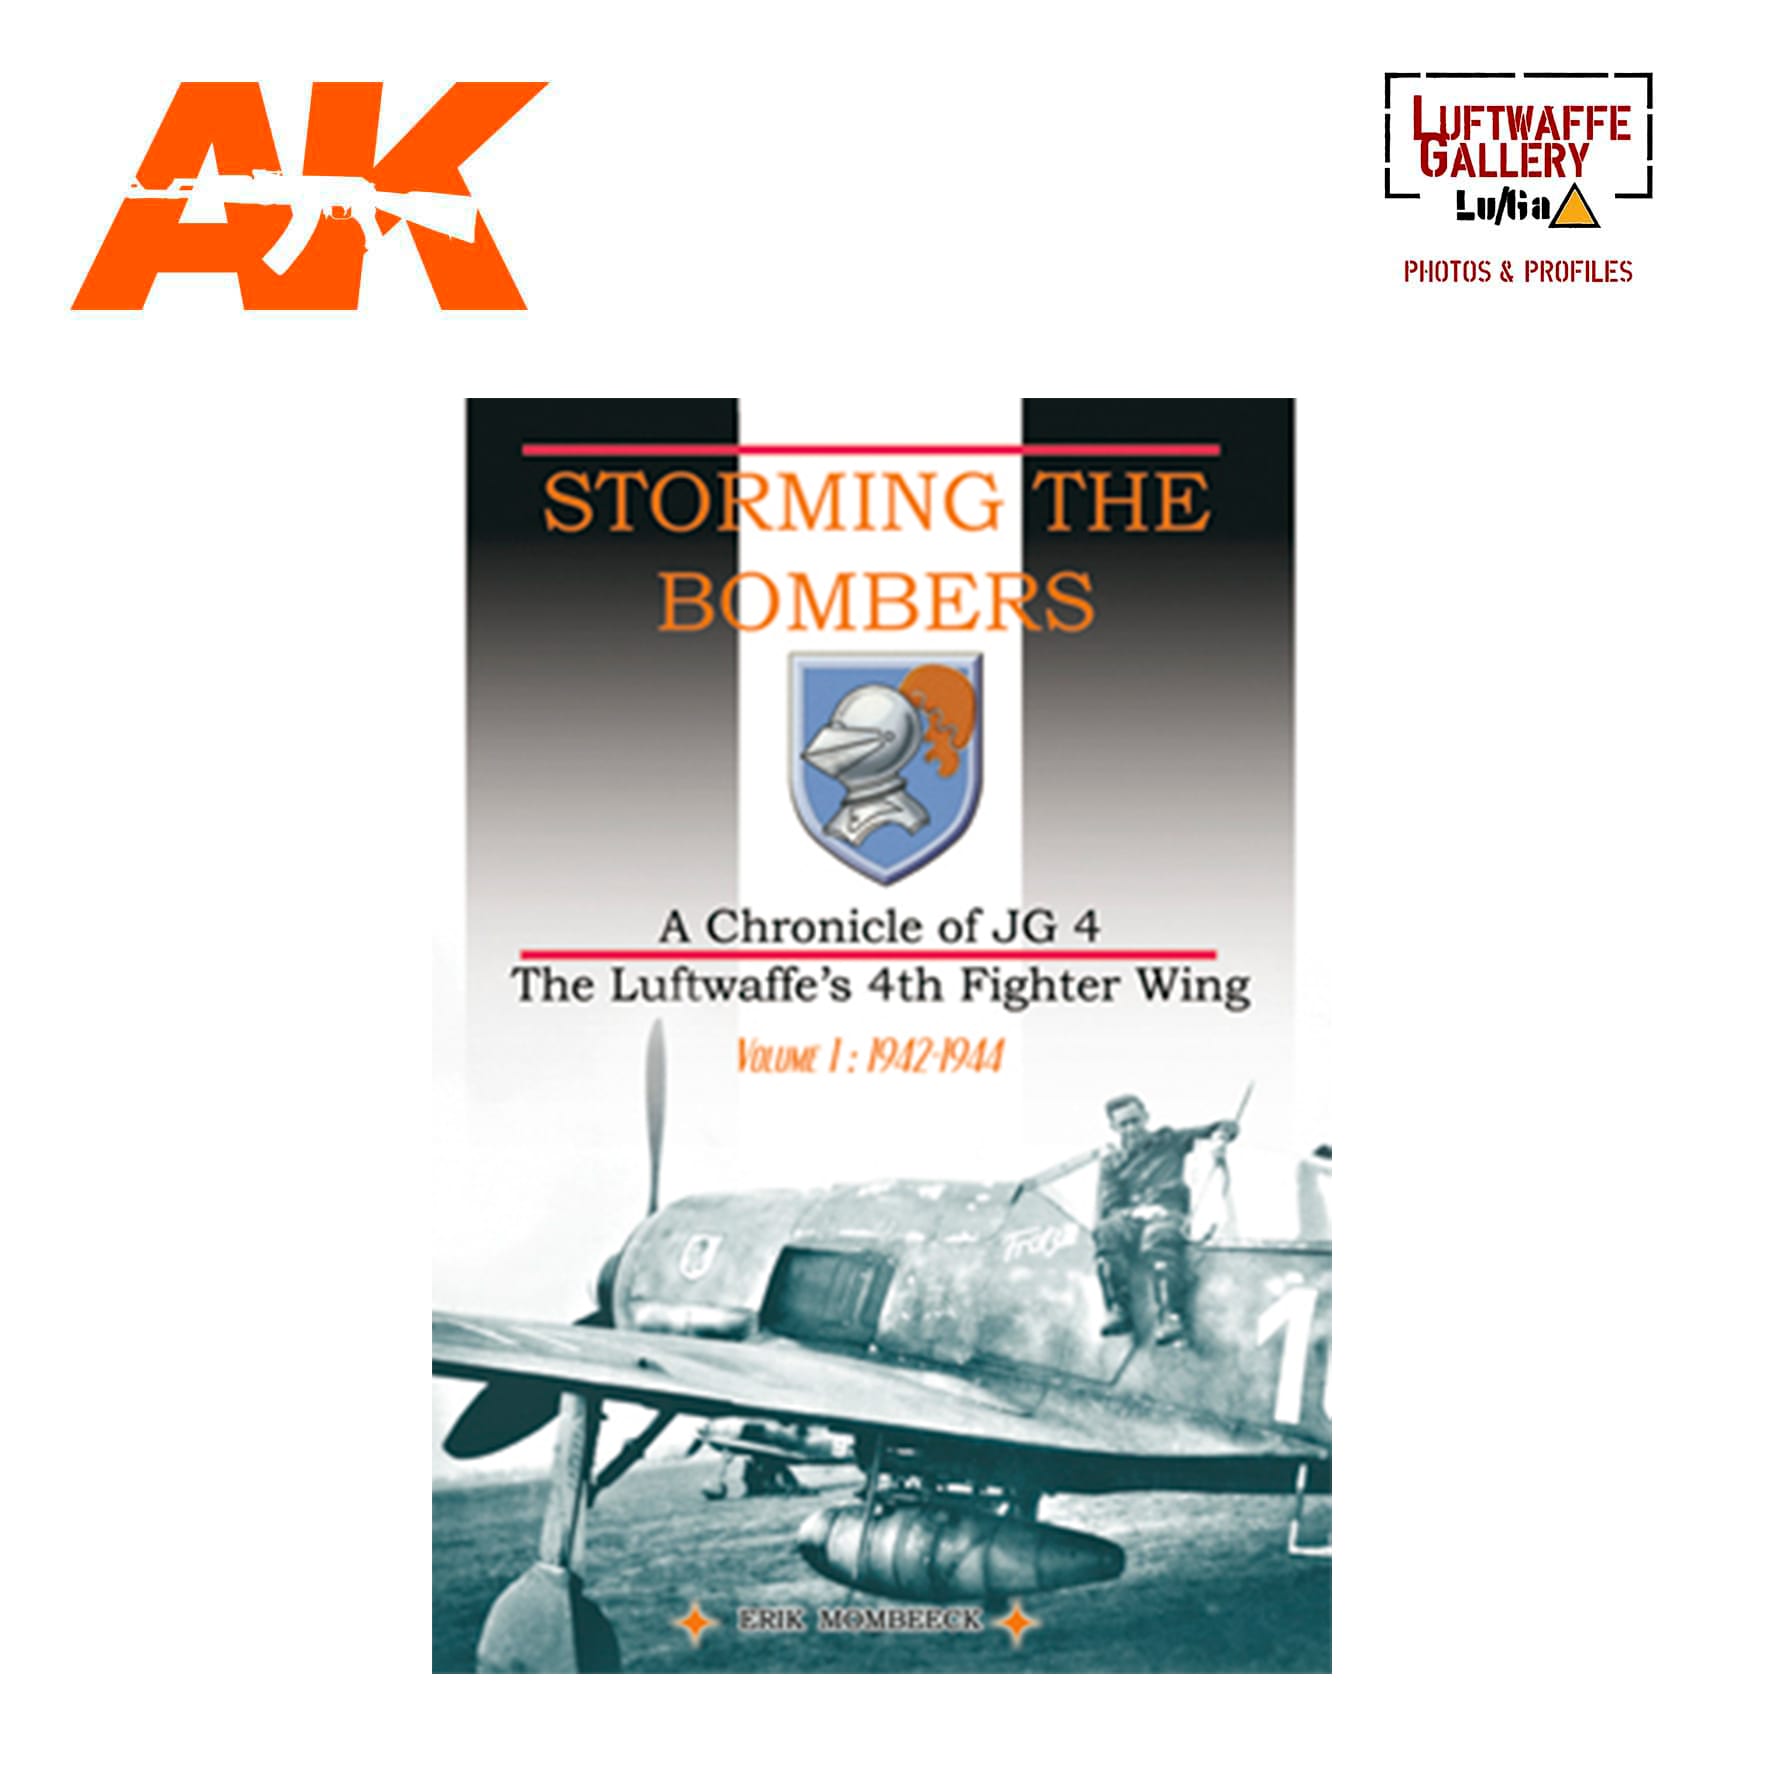 Storming the bombers. A Chronicle of JG 4 Vol. 1  1942-1944